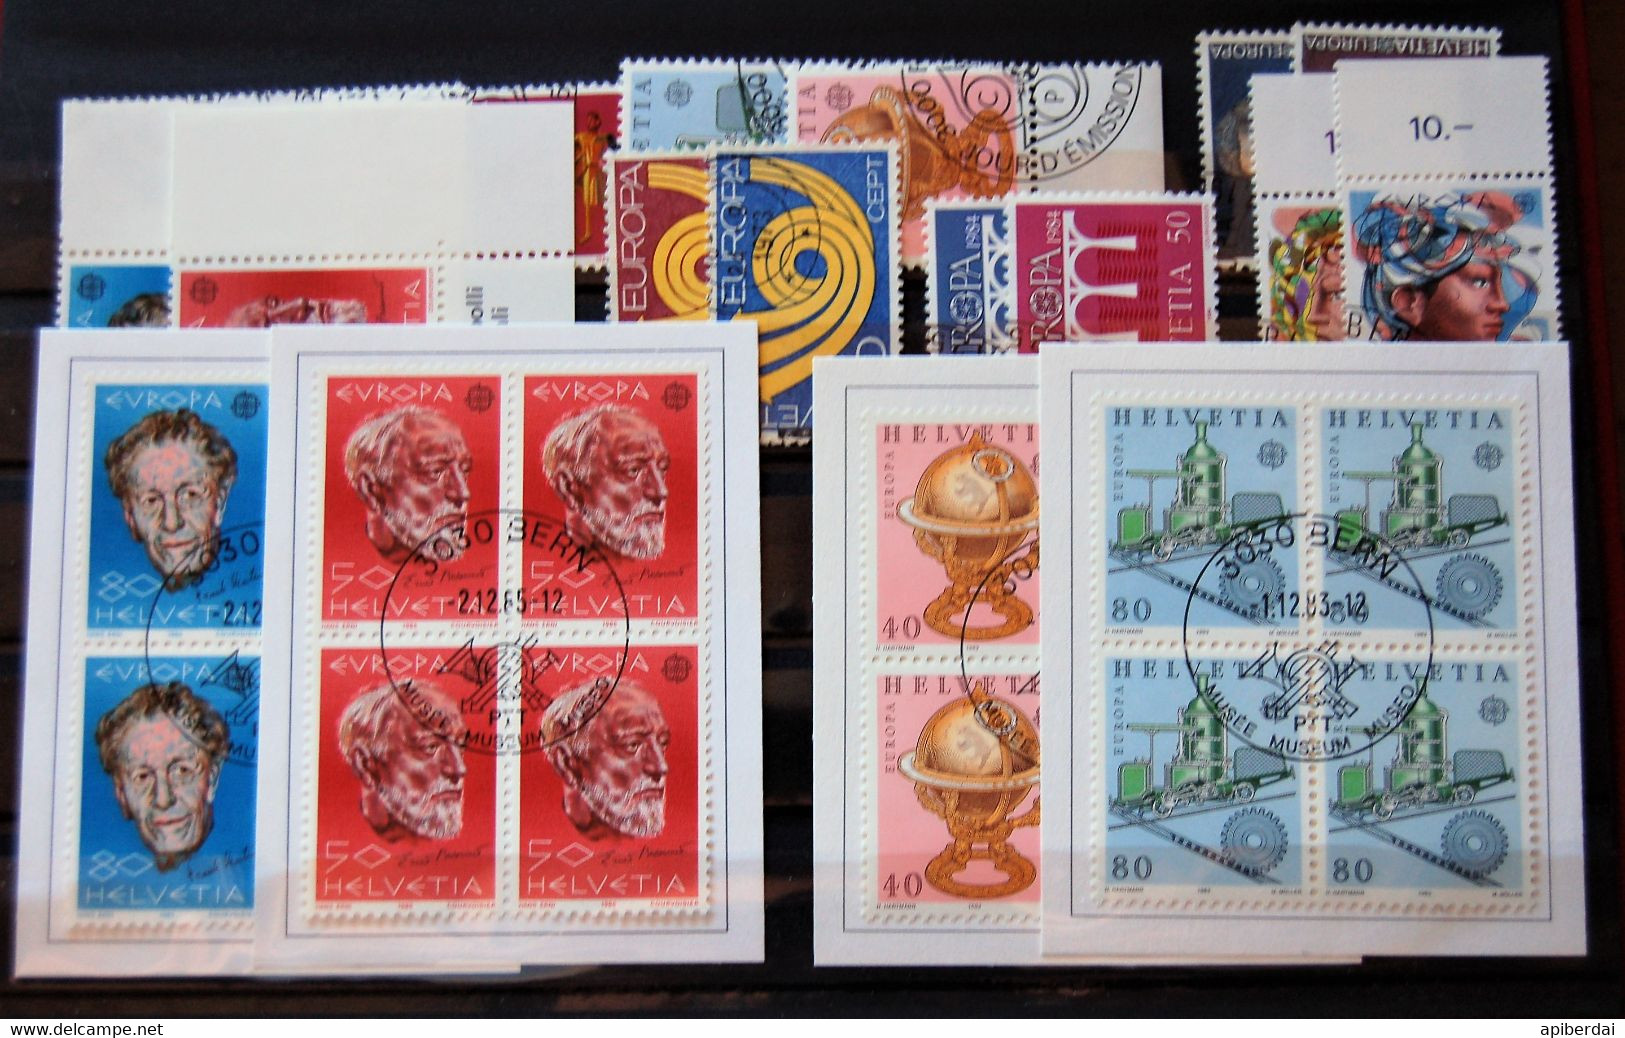 Suisse Switzerland - Small Batch Of  9 Series "europa" Stamps Used - Colecciones